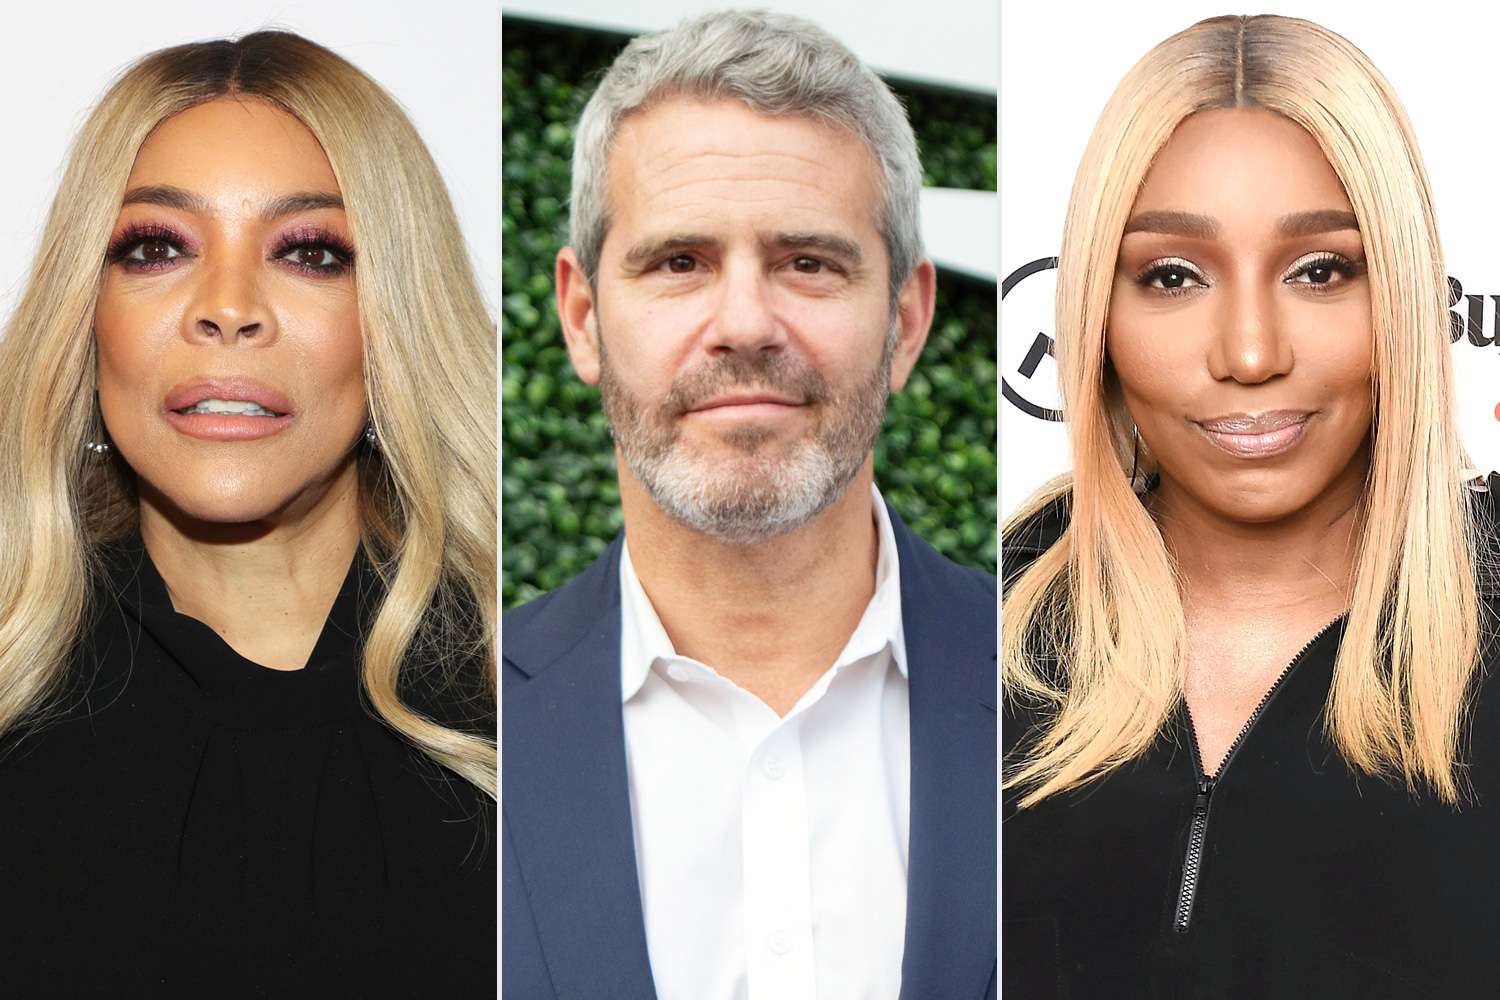 Wendy Williams, Andy Cohen, Nene Leakes